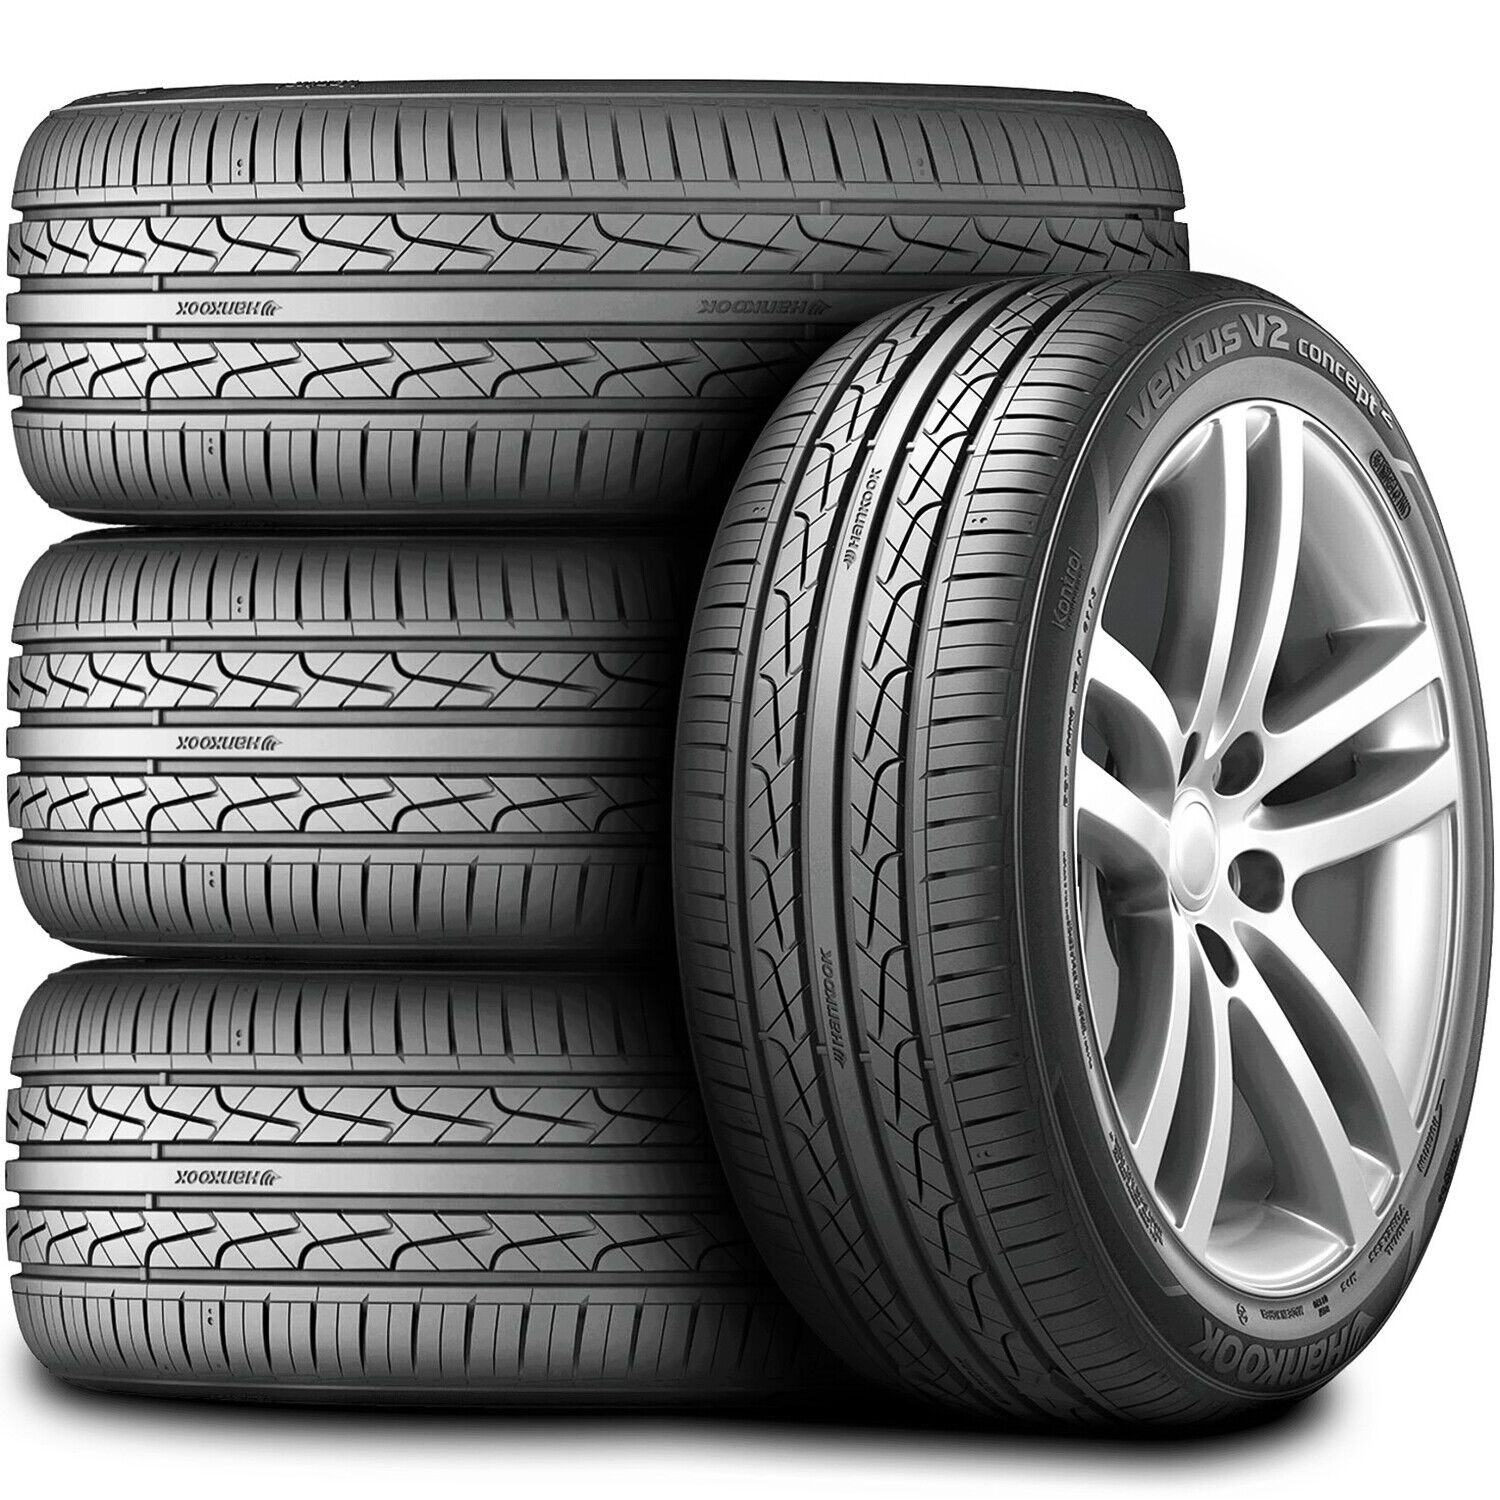 4 Tires Hankook Ventus V2 Concept2 195/50R15 82H AS Performance A/S